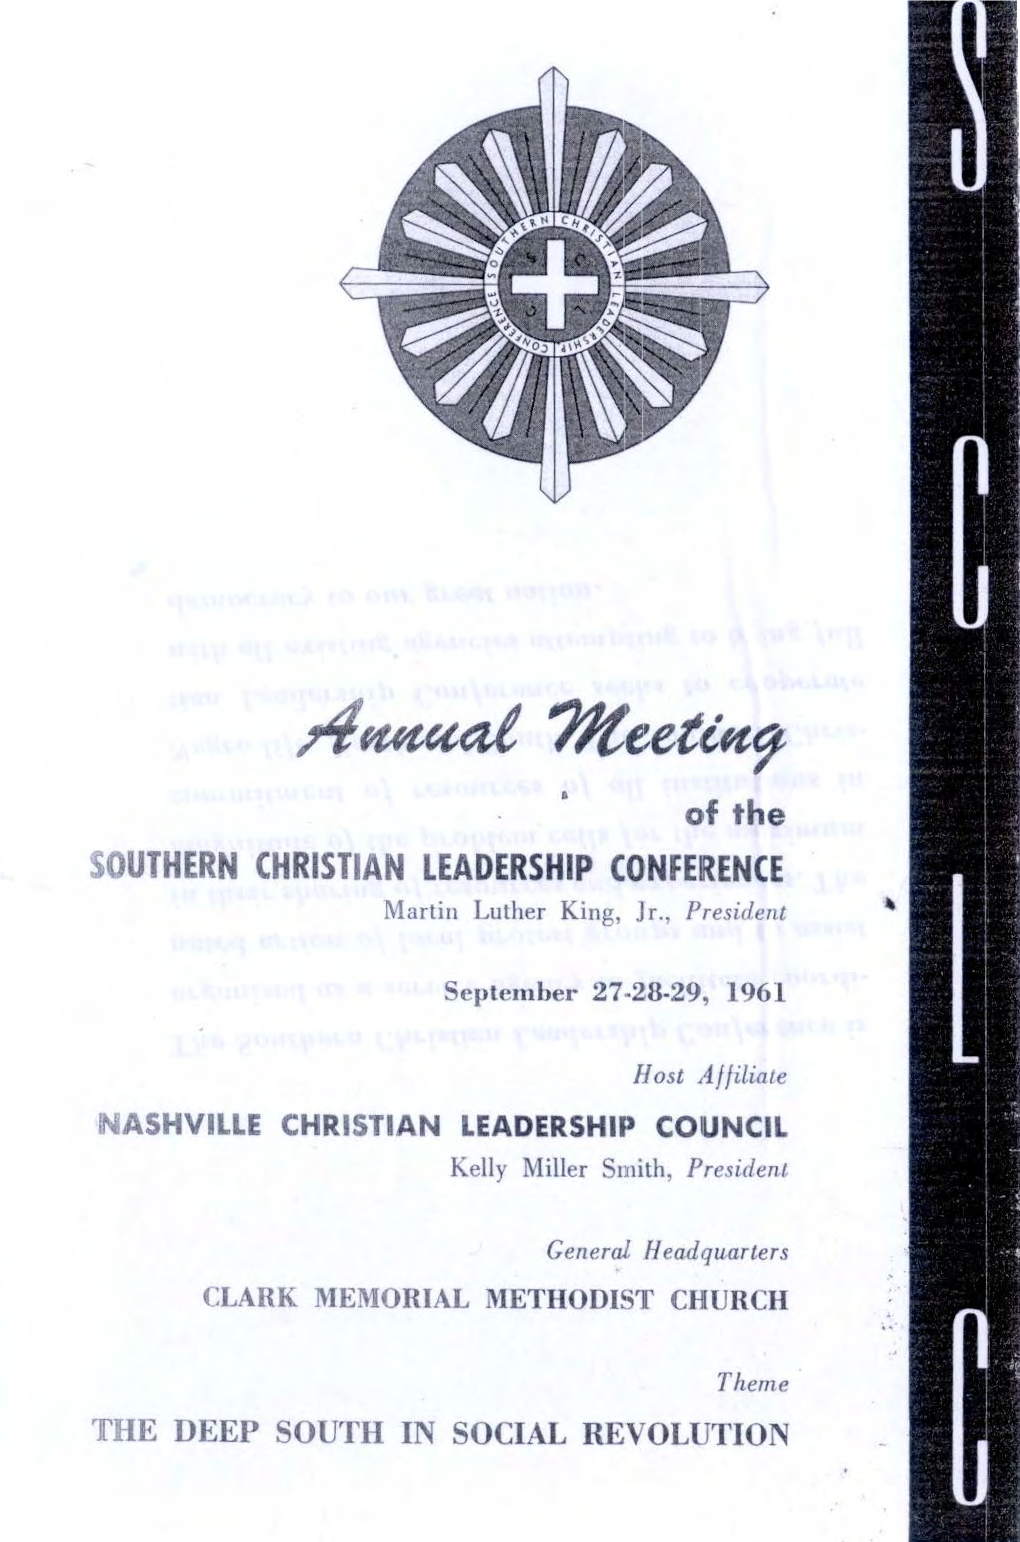 Annual Meeting of the Southern Christian Leadership Conference